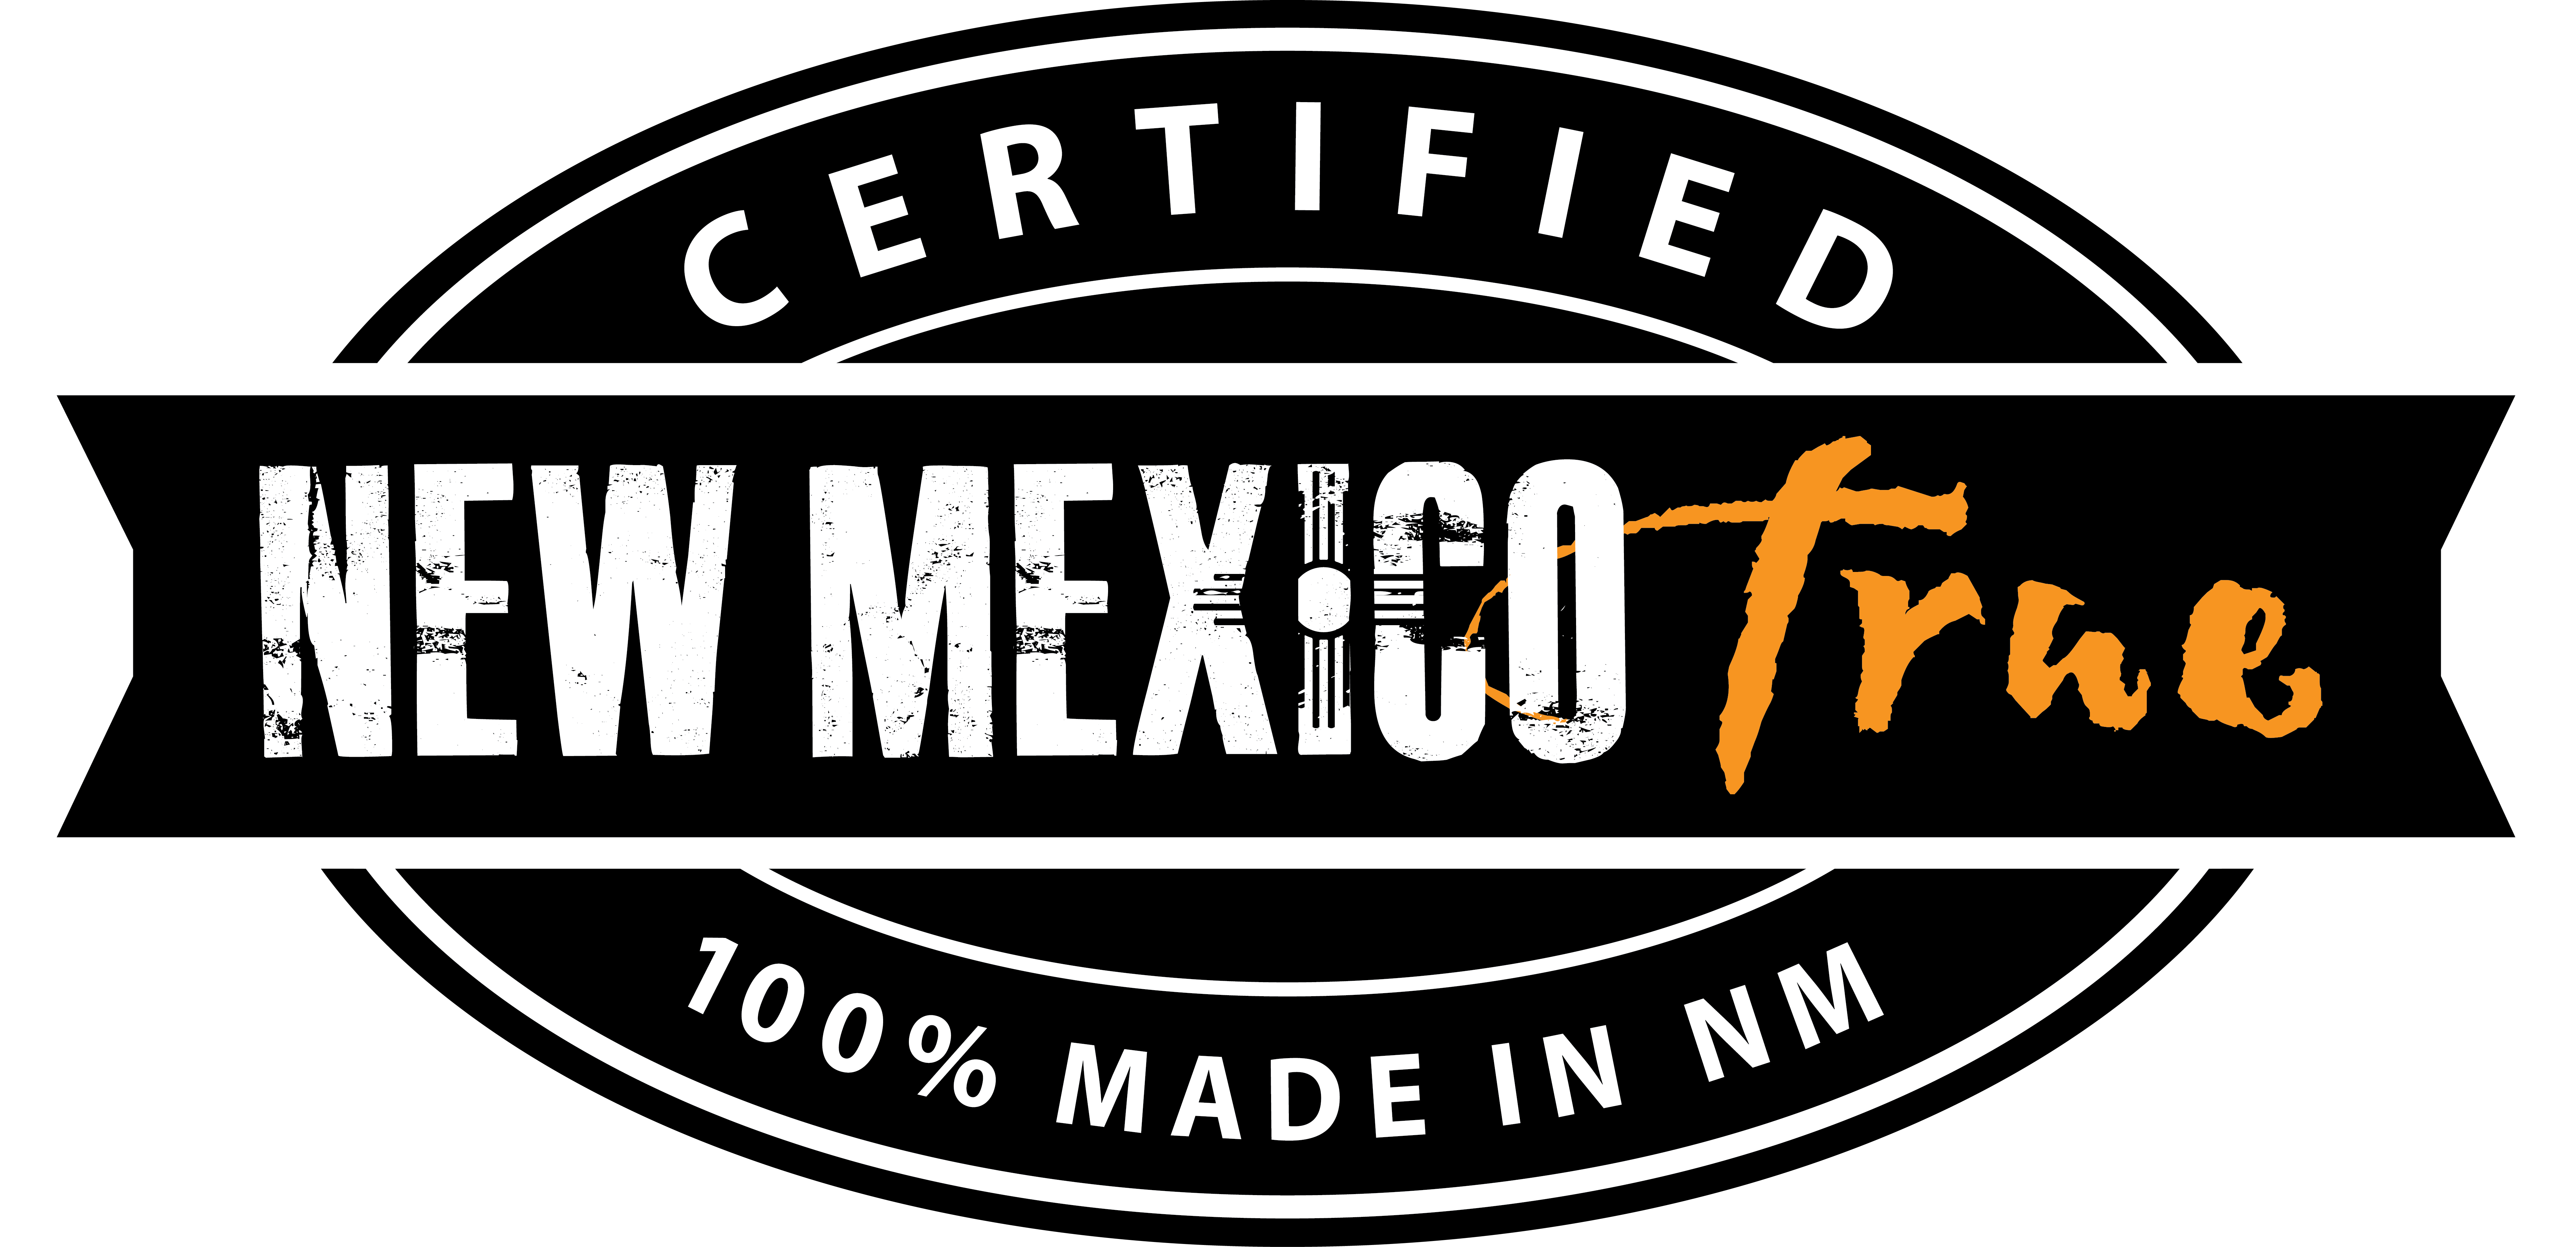 Certified Logo - New Mexico Tourism Department NM True Certified